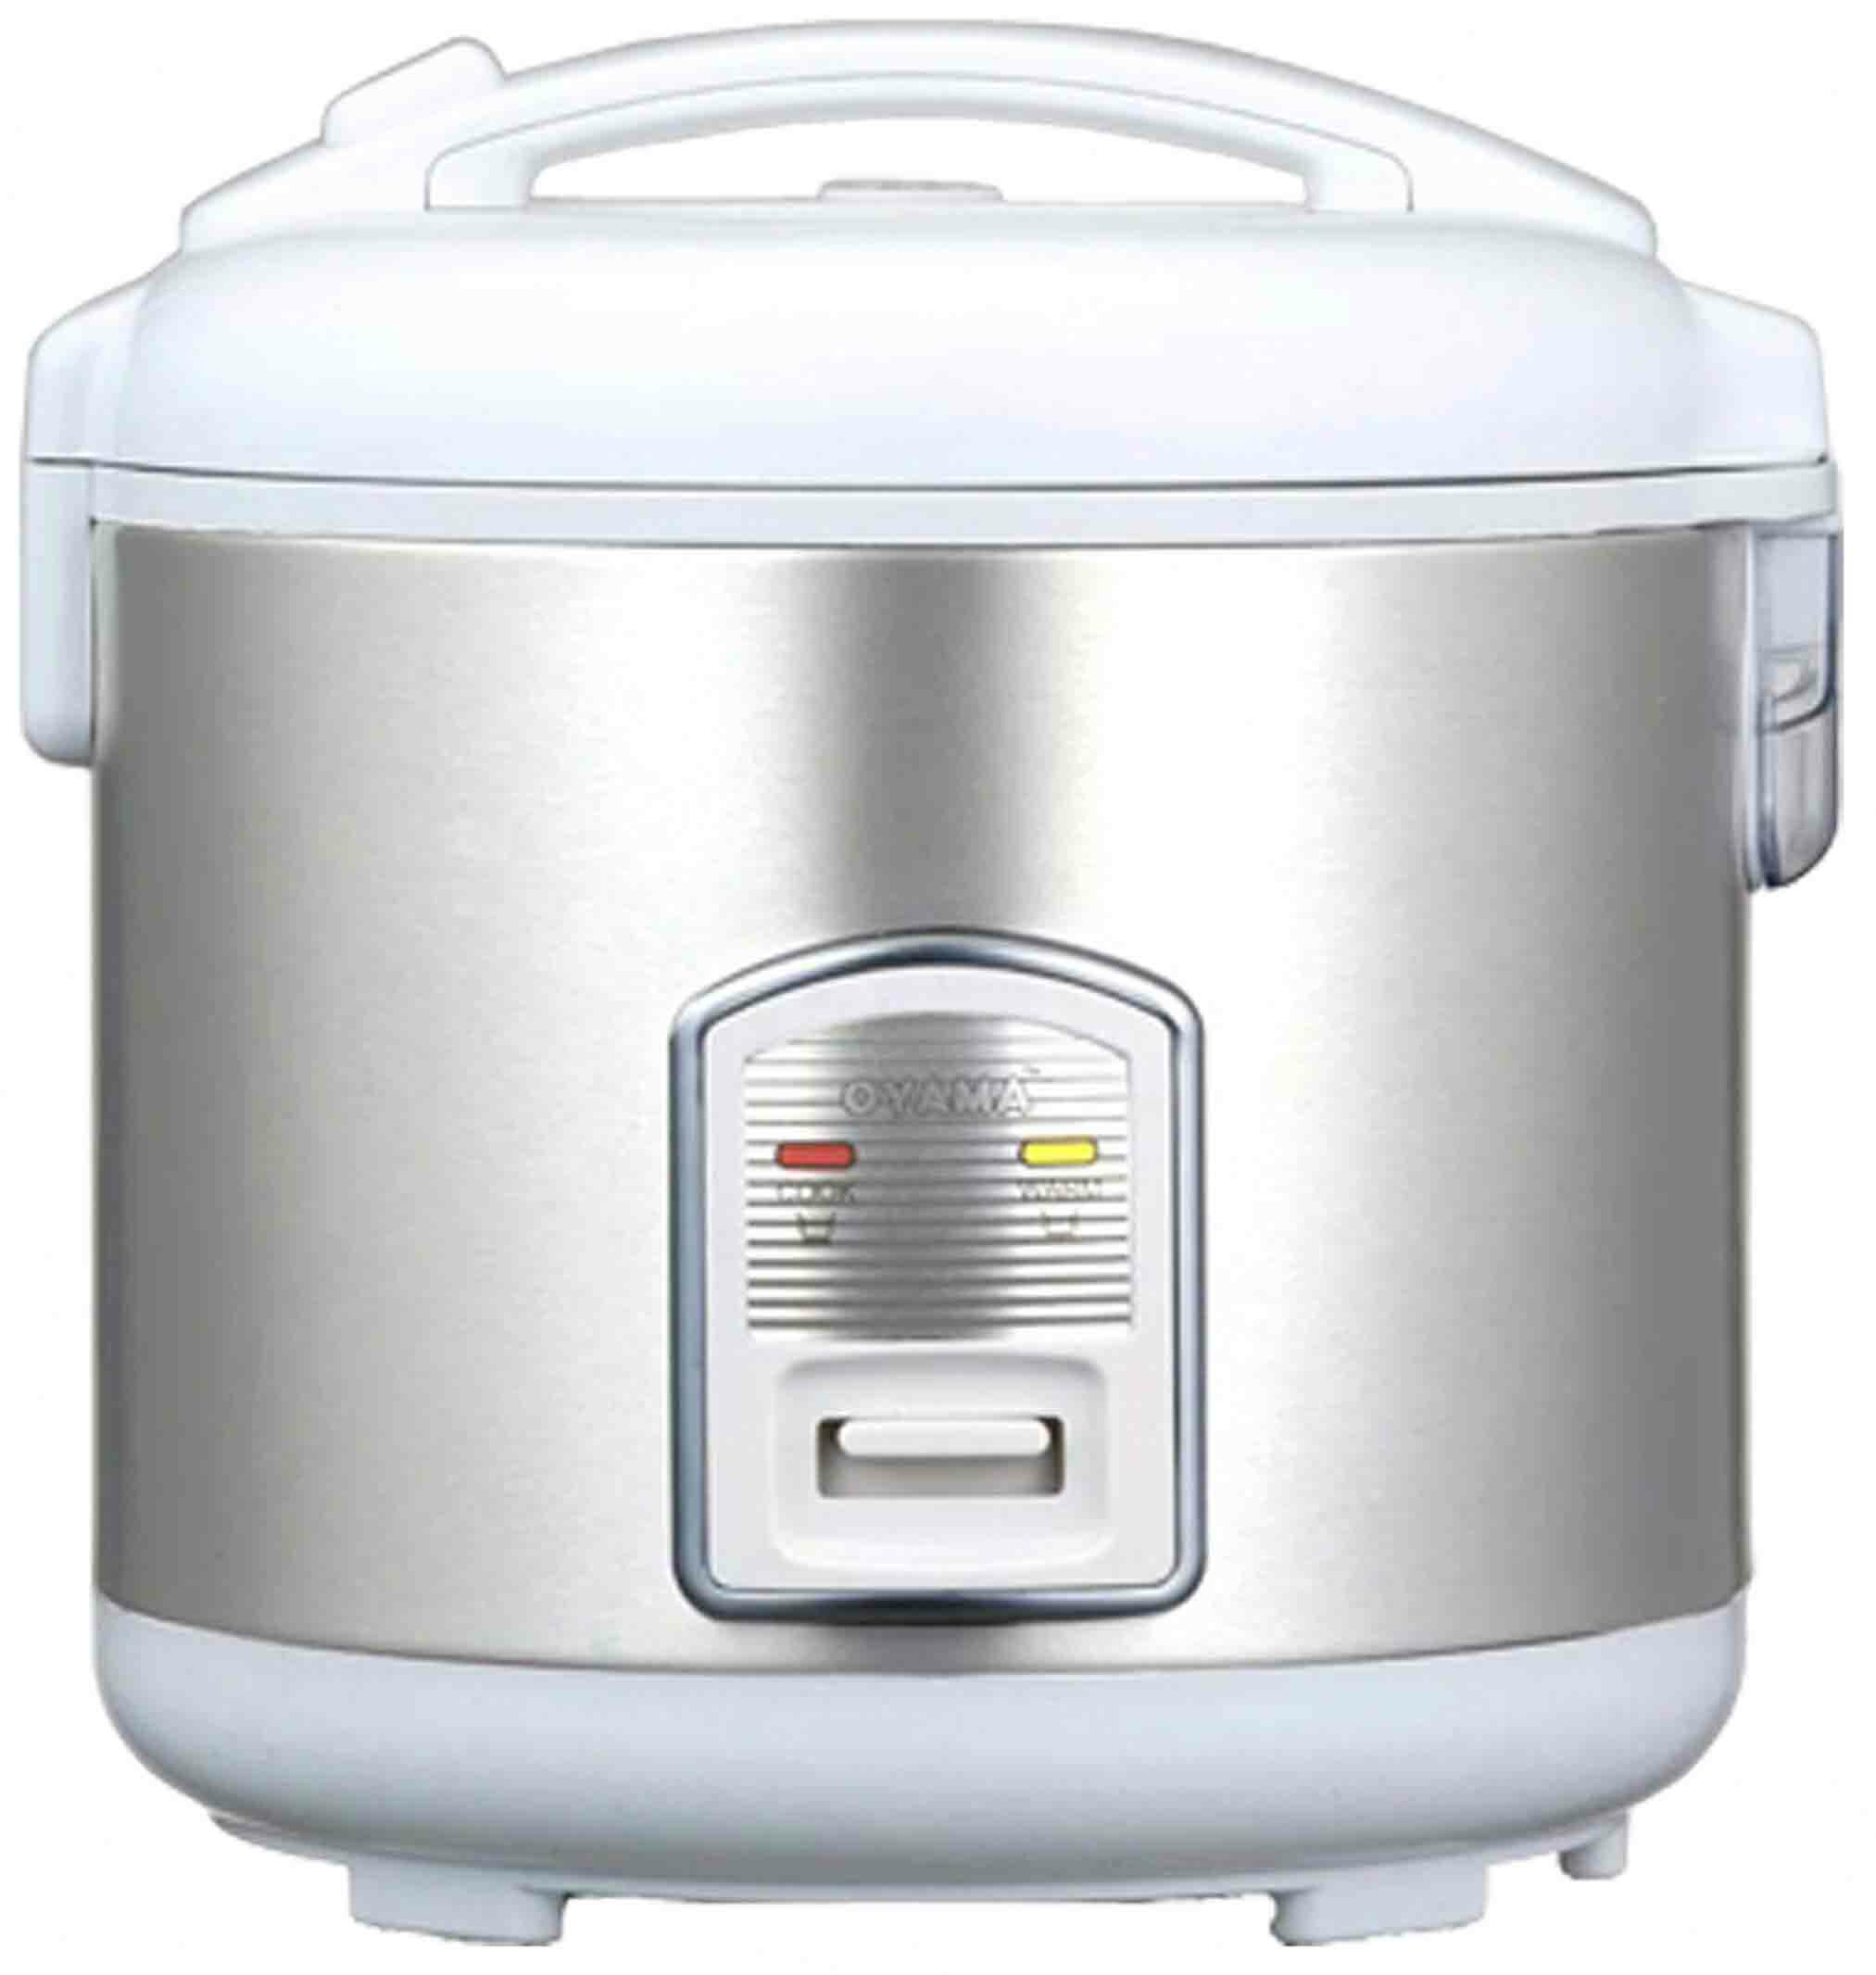  Rice Cooker with Steamer (2-6L) 304 Stainless Steel